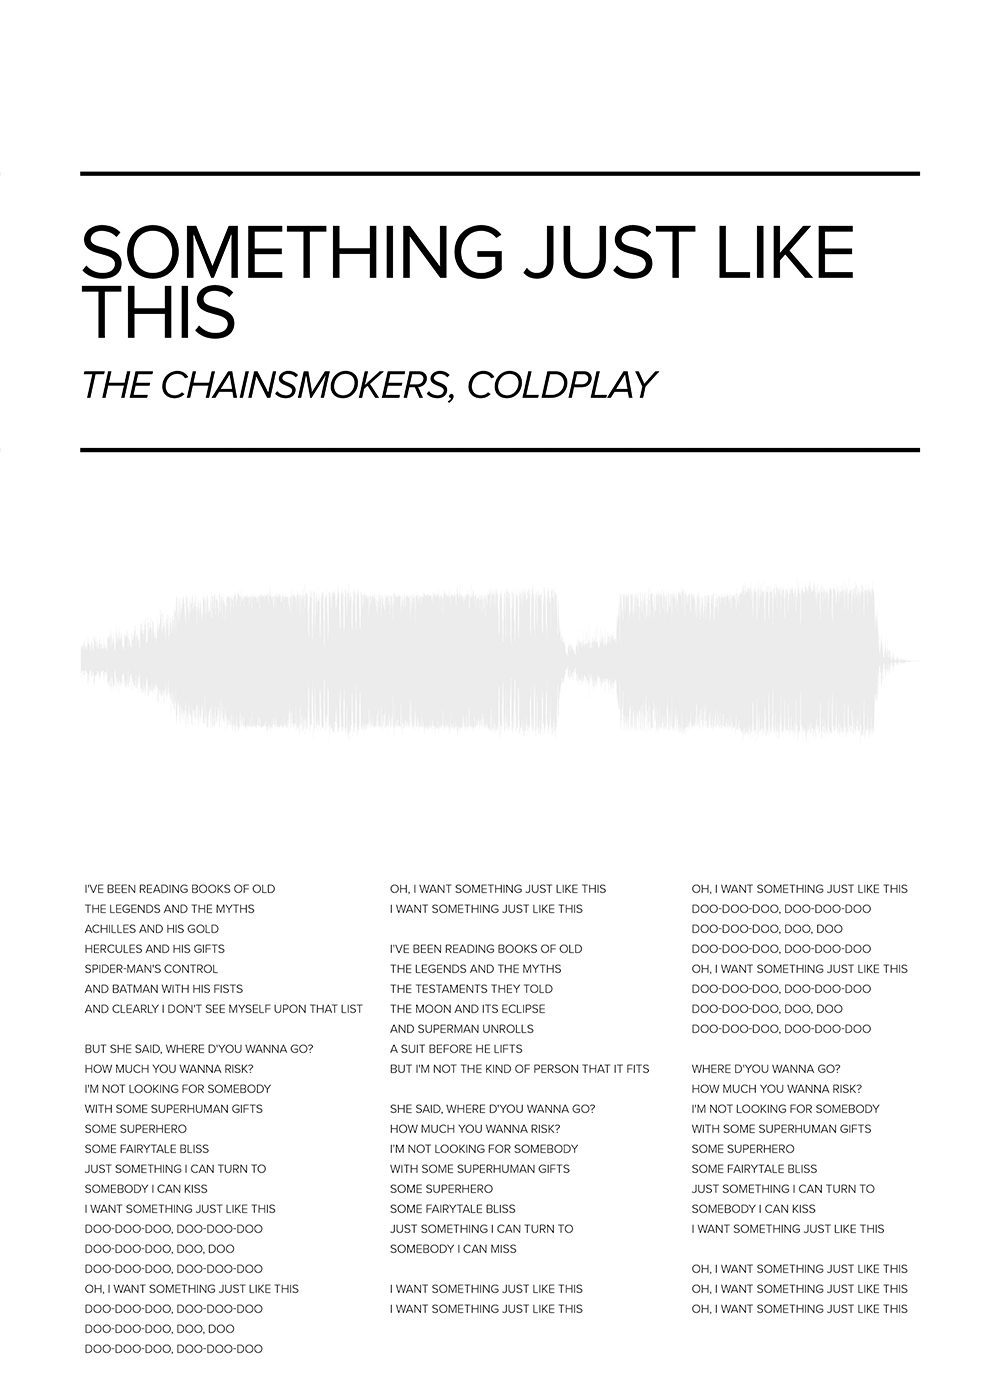 The Chainsmokers & Coldplay - Something Just Like This Poster